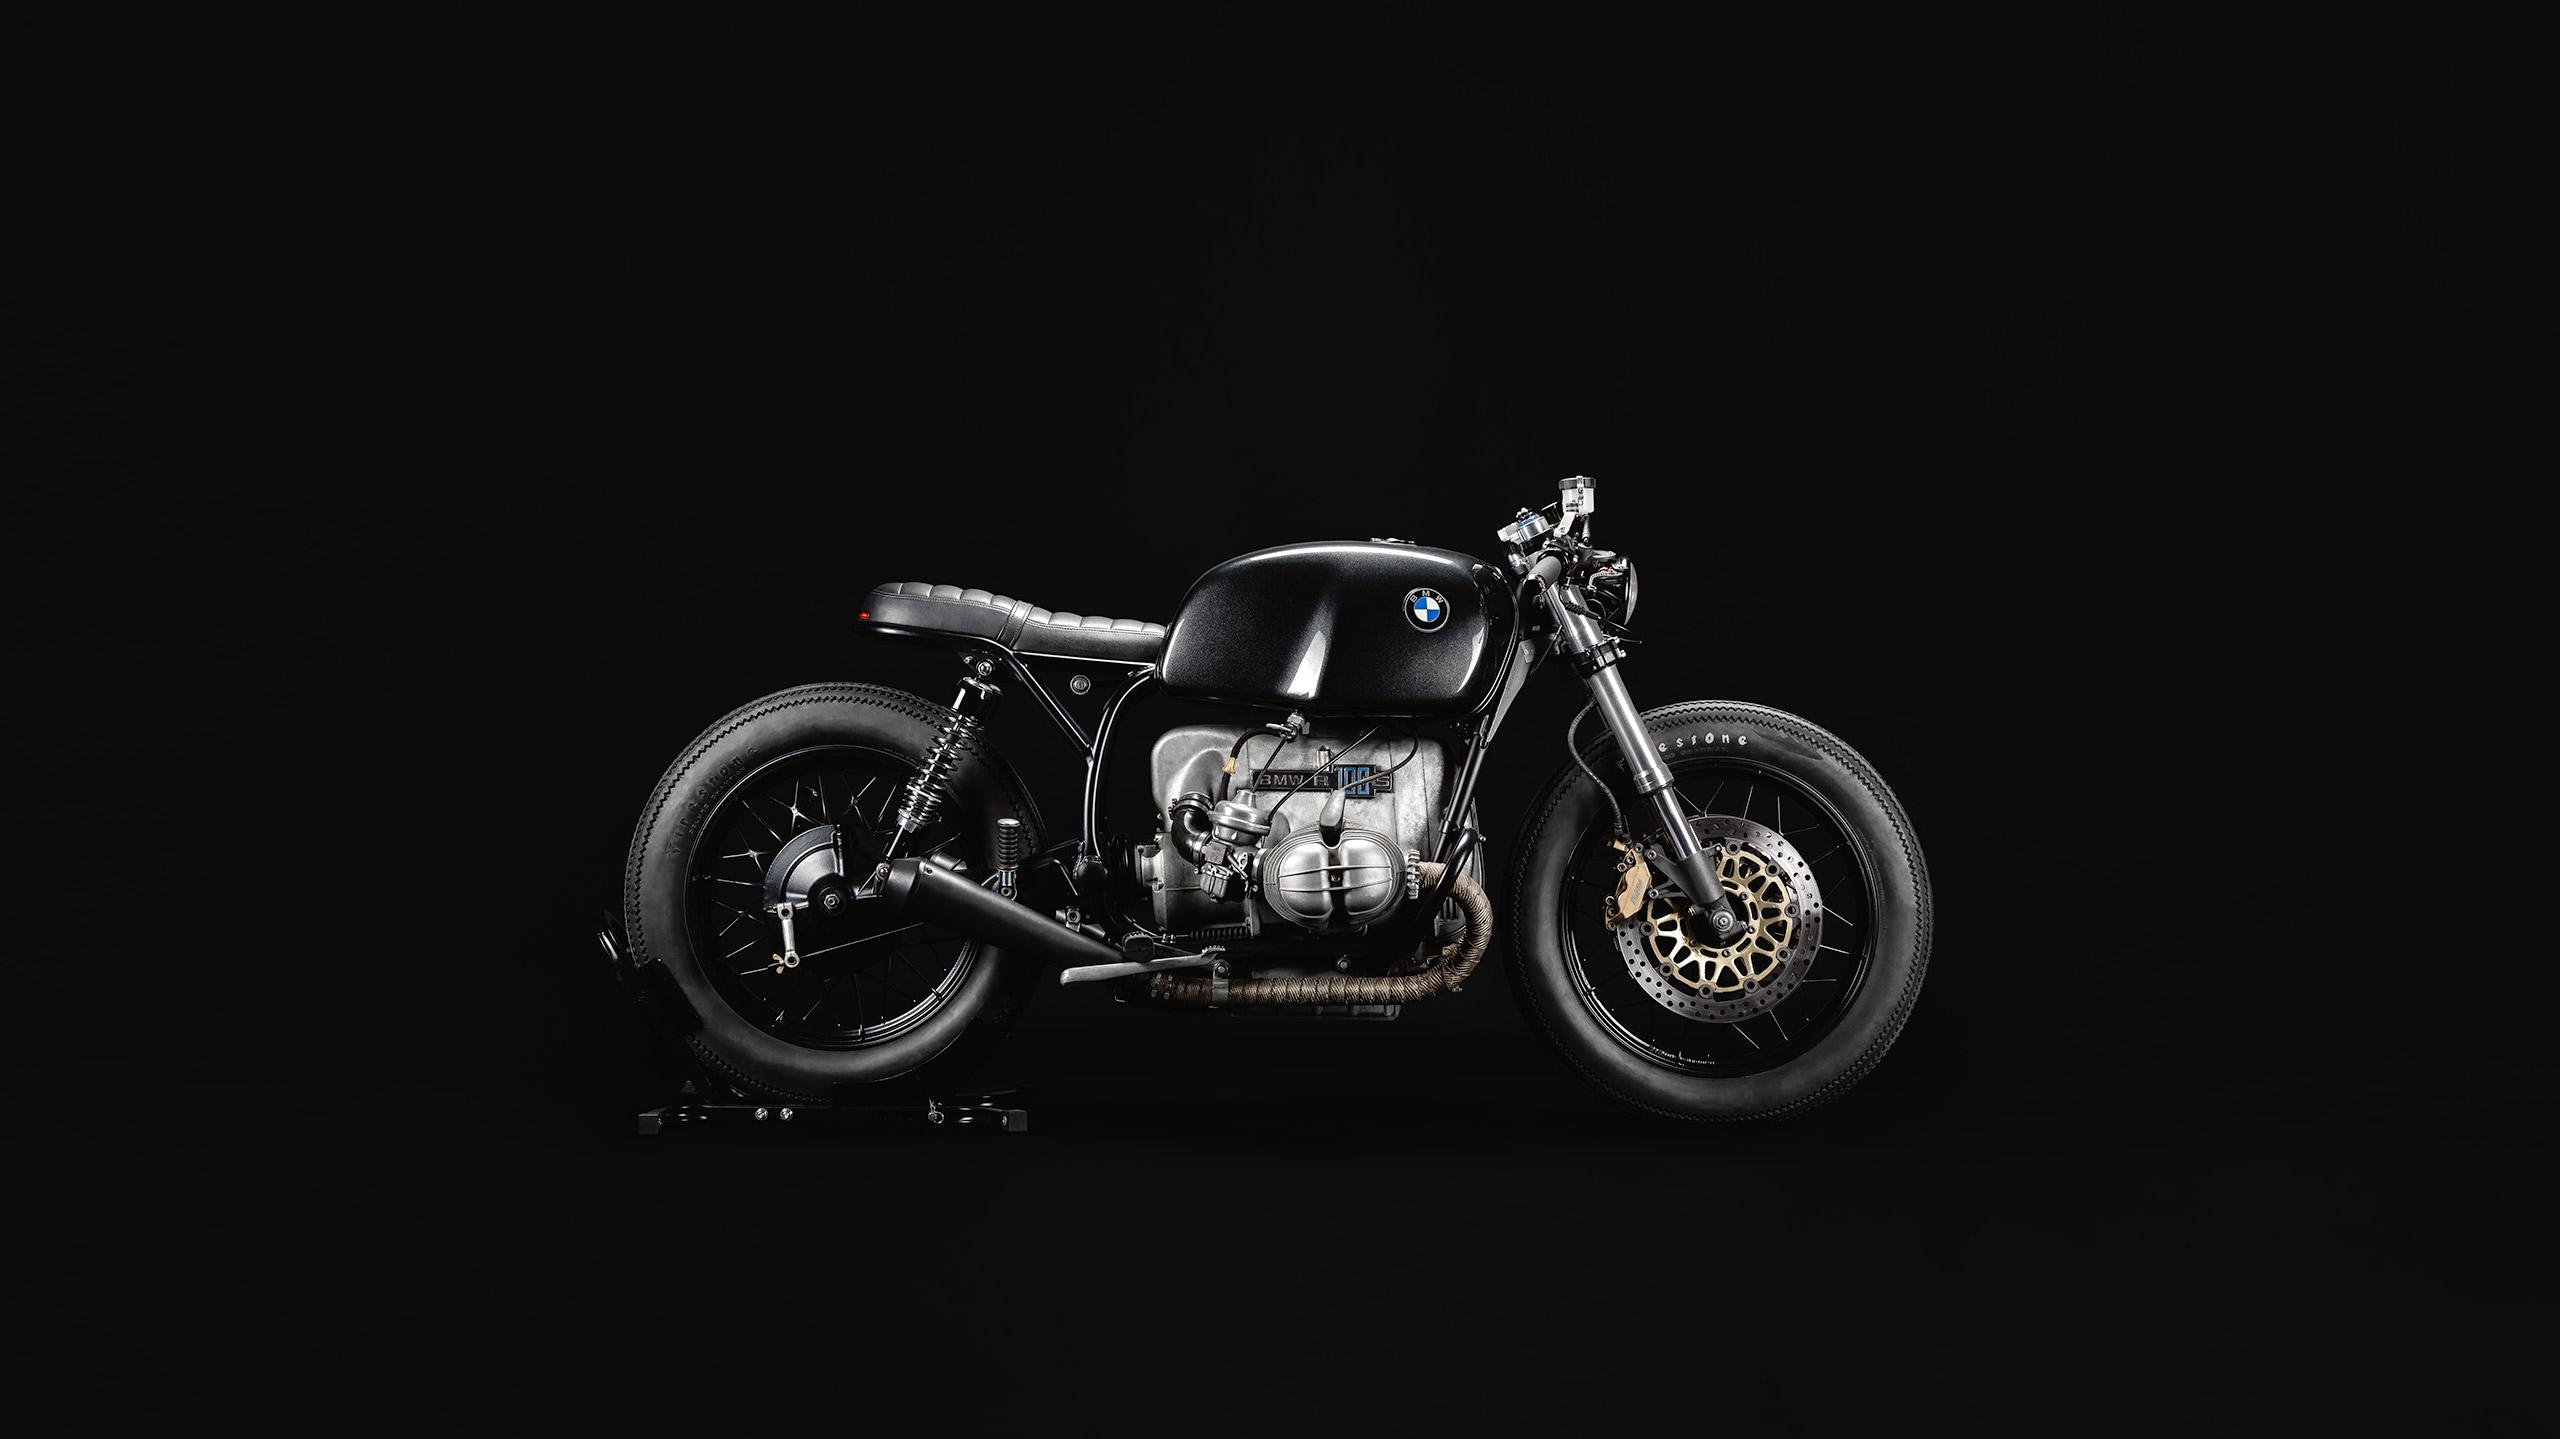 Remixed Bmw R100rs Has Cbr Running Gear And Tons Of